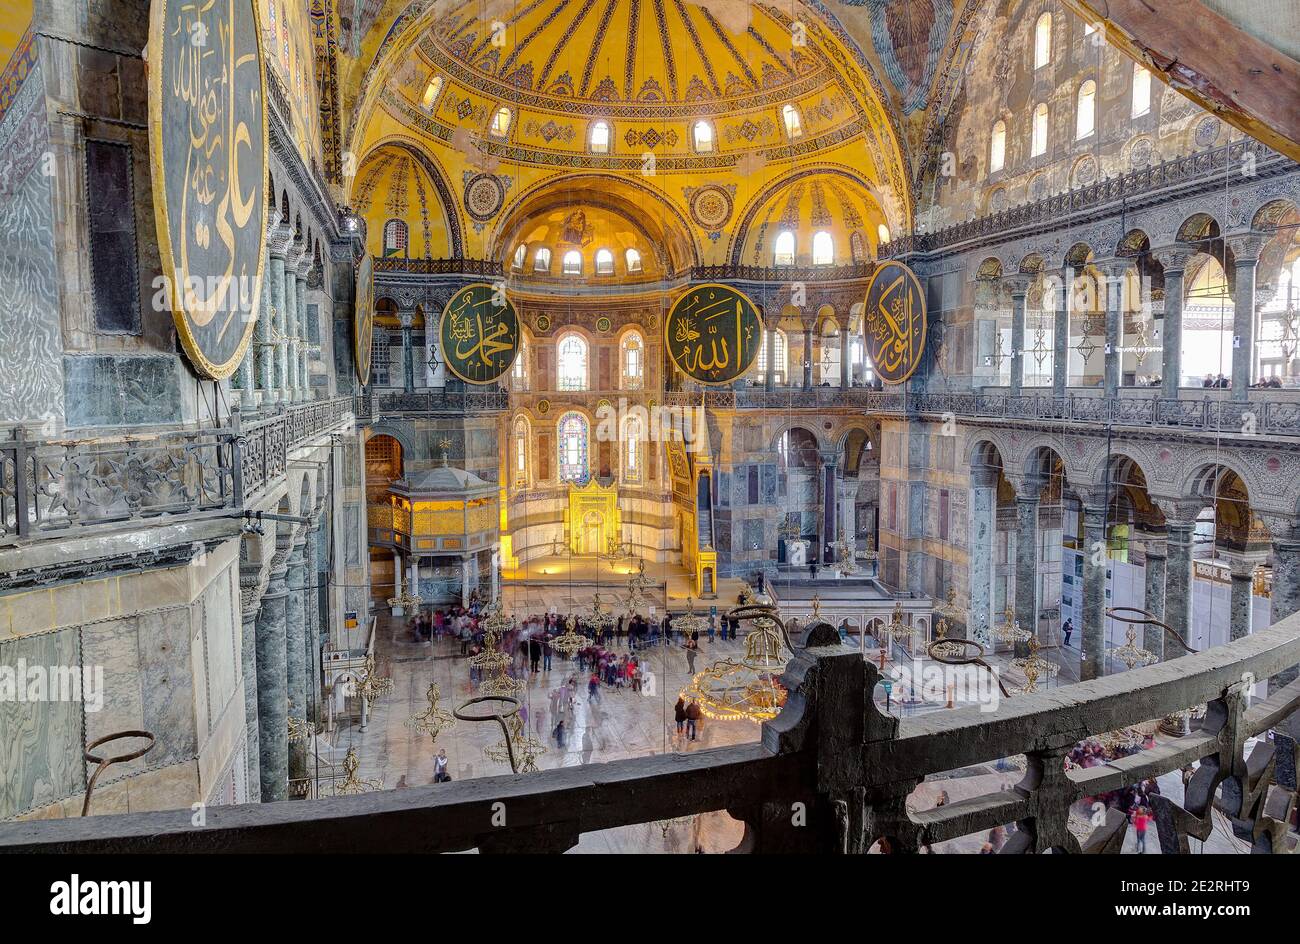 Hagia Sophia interior on December 28, 2012 in Istanbul, Turkey. Hagia Sophia was the world's largest cathedral for nearly a thousand years. Stock Photo